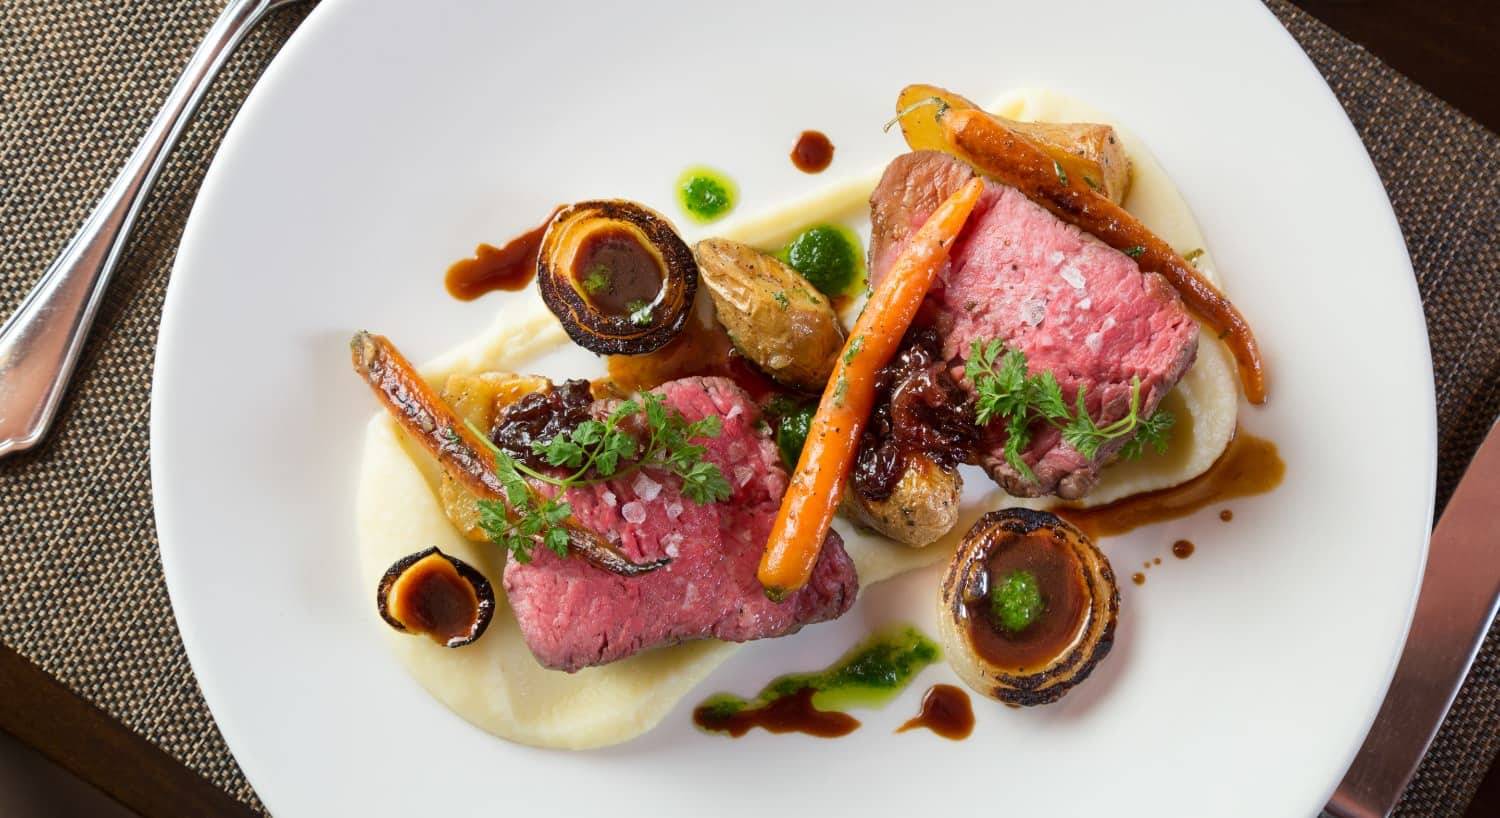 Close up view of dish with beef and roasted potatoes, carrots, and onions on white porcelain plate